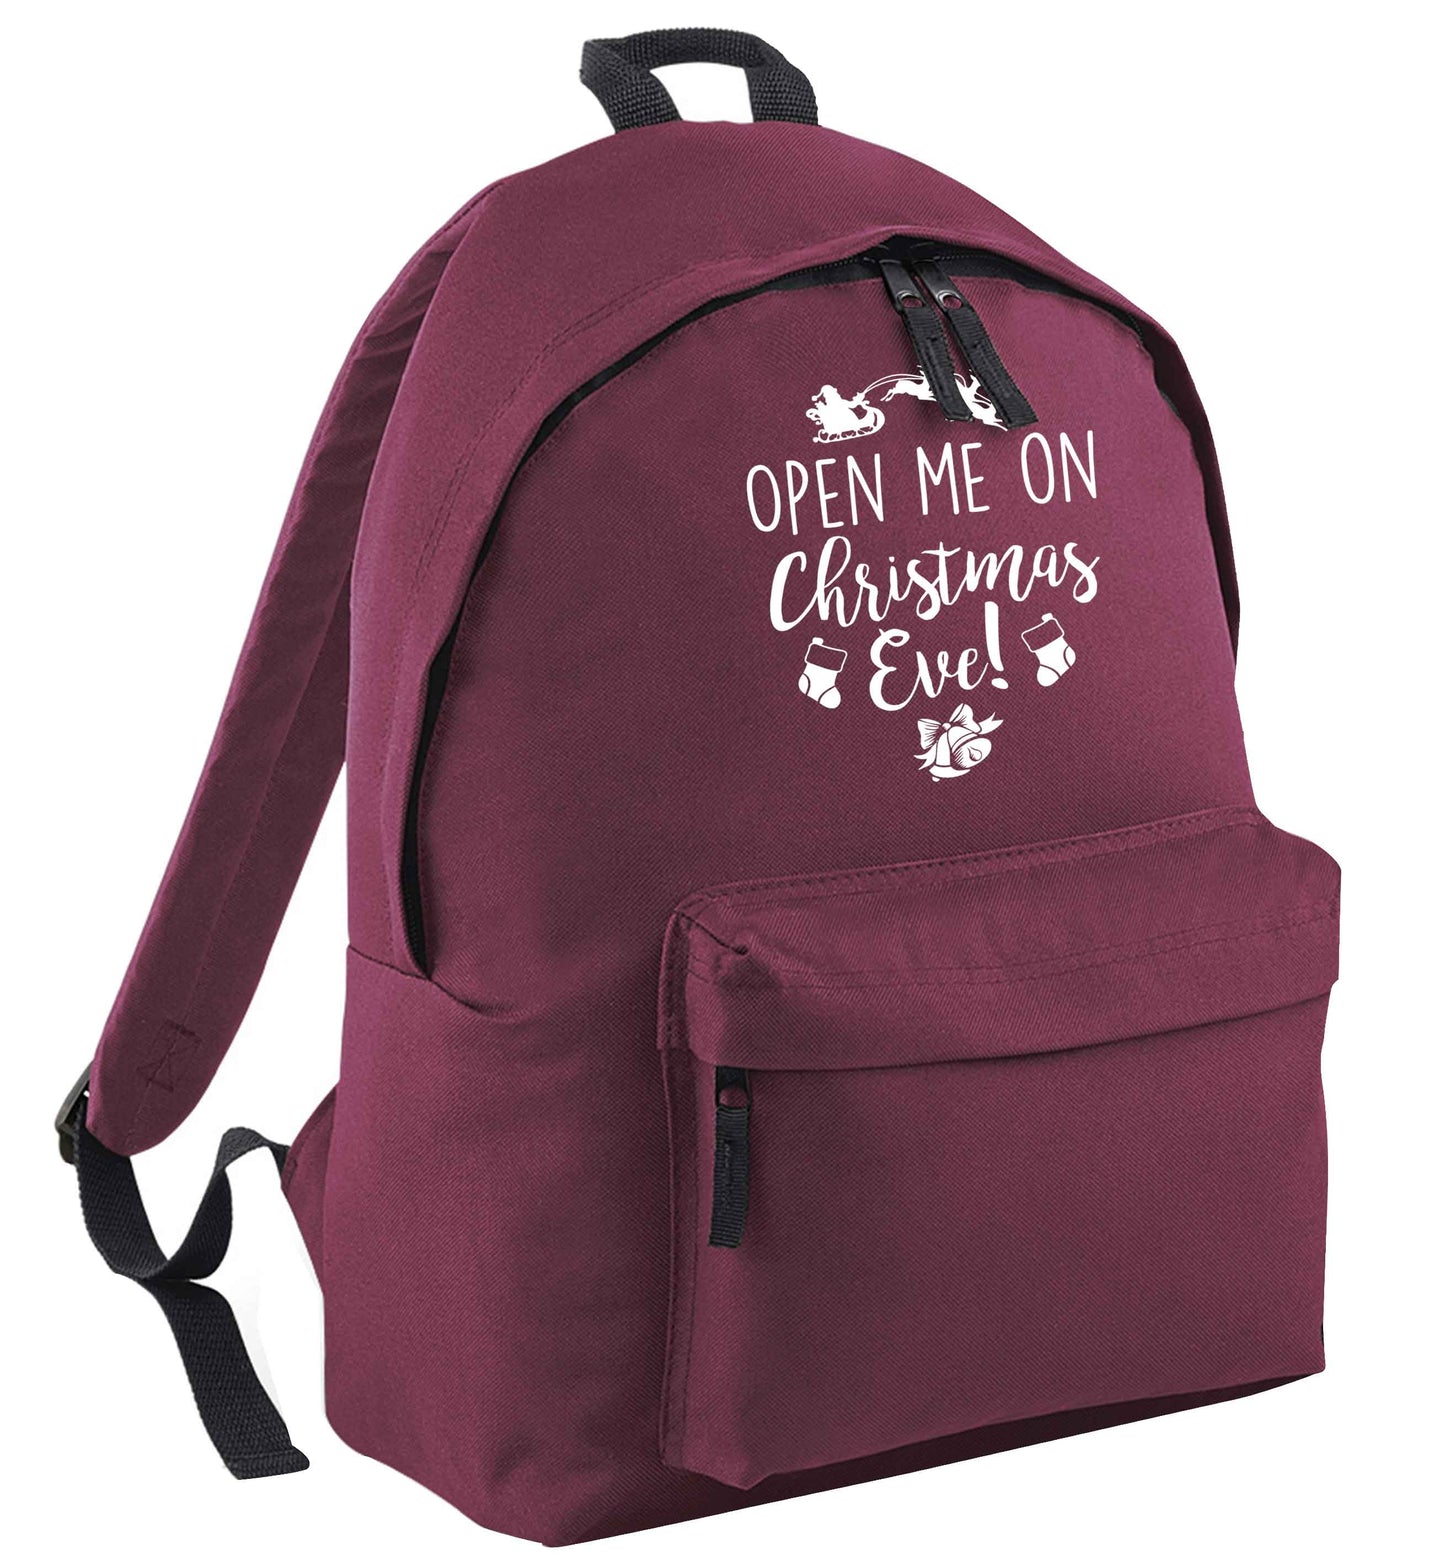 Open me on Christmas Day maroon adults backpack